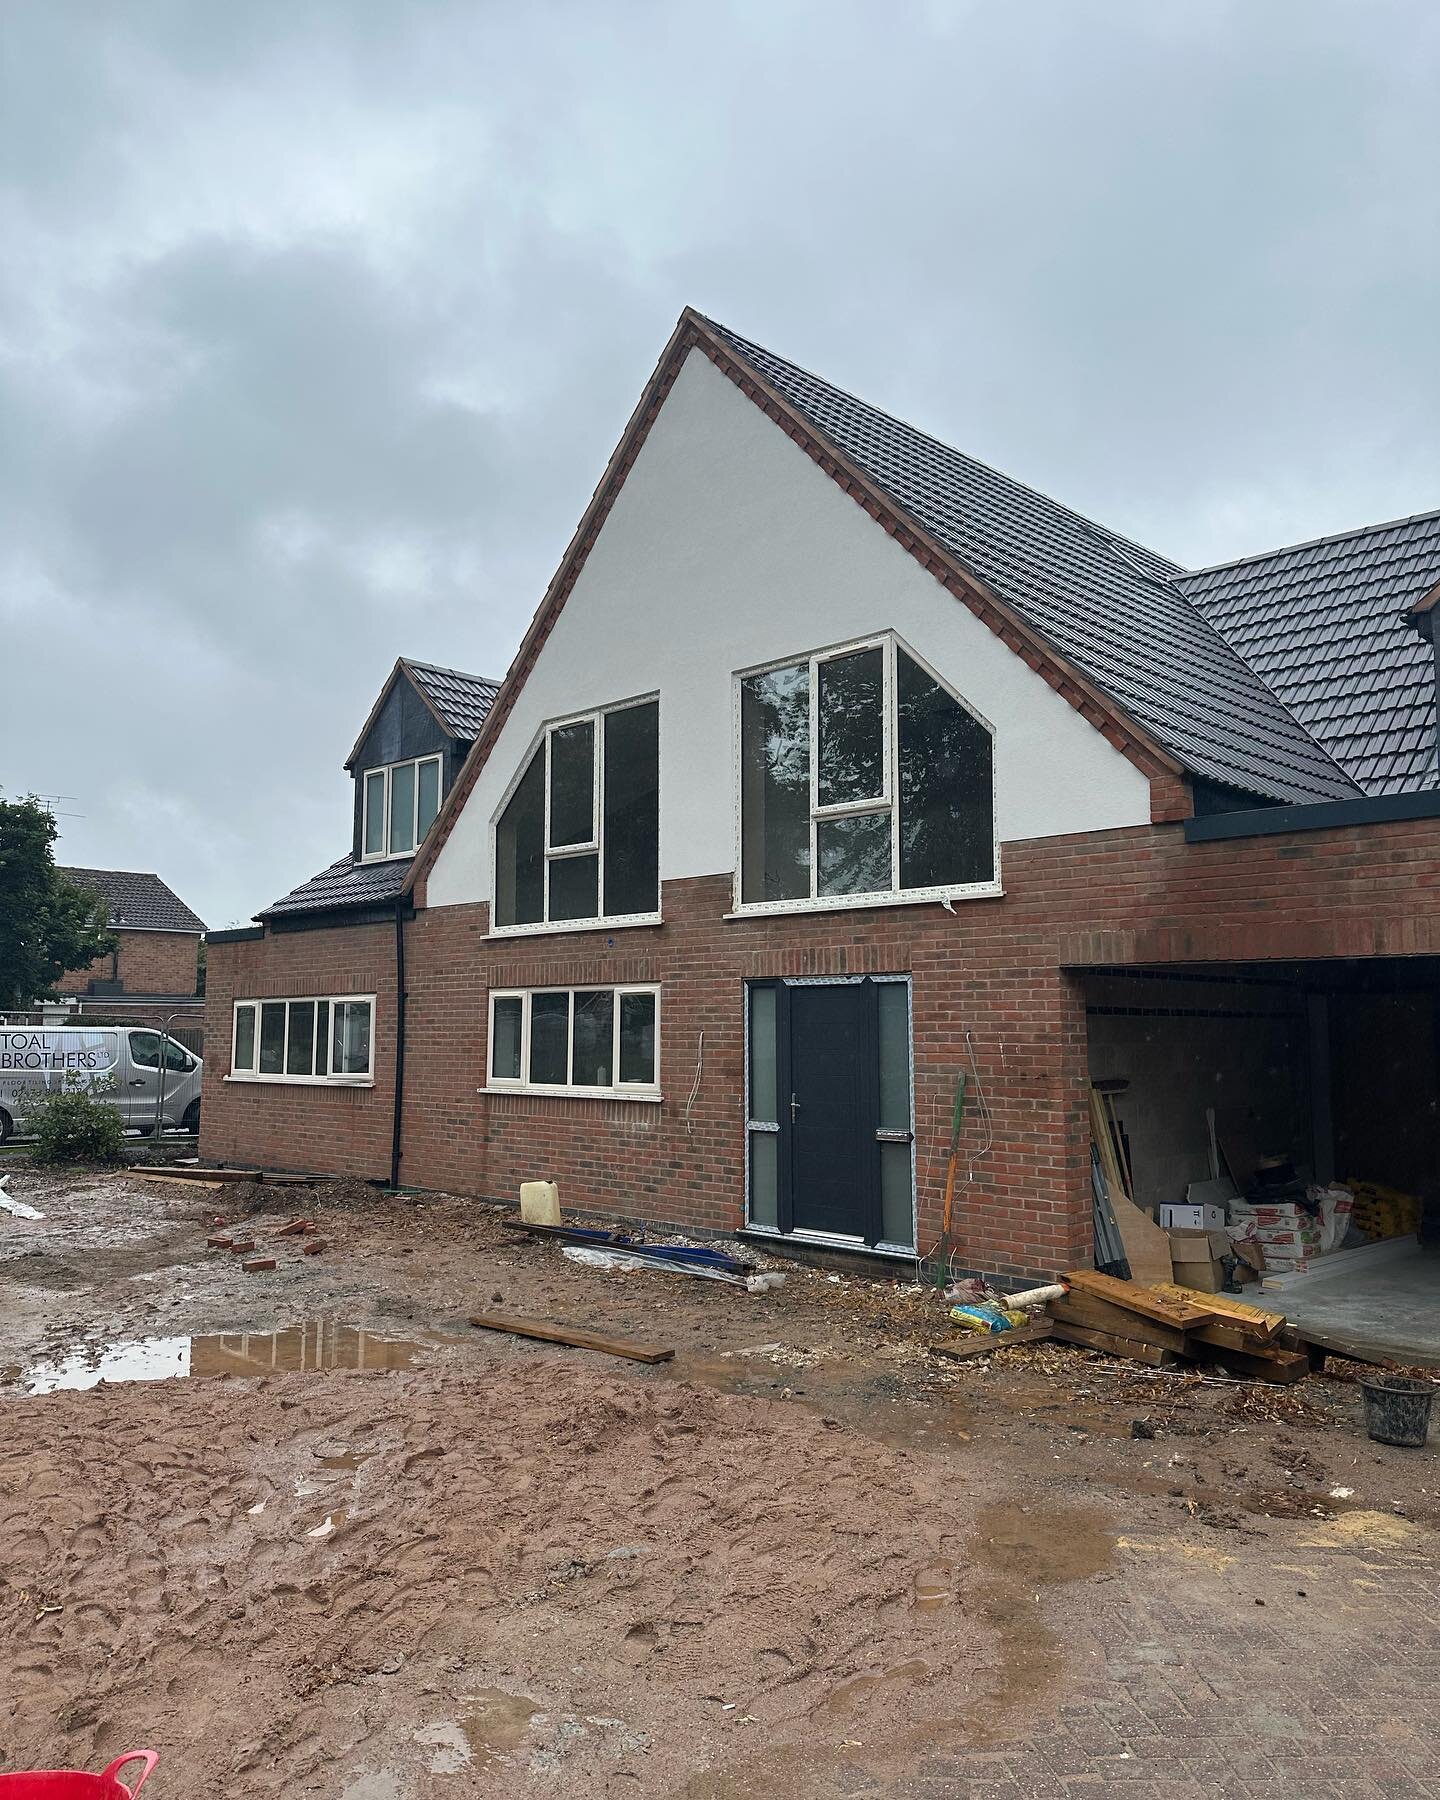 A few progress photos from a site visit this week. A complete transformation from 6 months ago 🏡 👷🏻&zwj;♂️ 

#planningpermission #houserenovation #architecture #homeextension